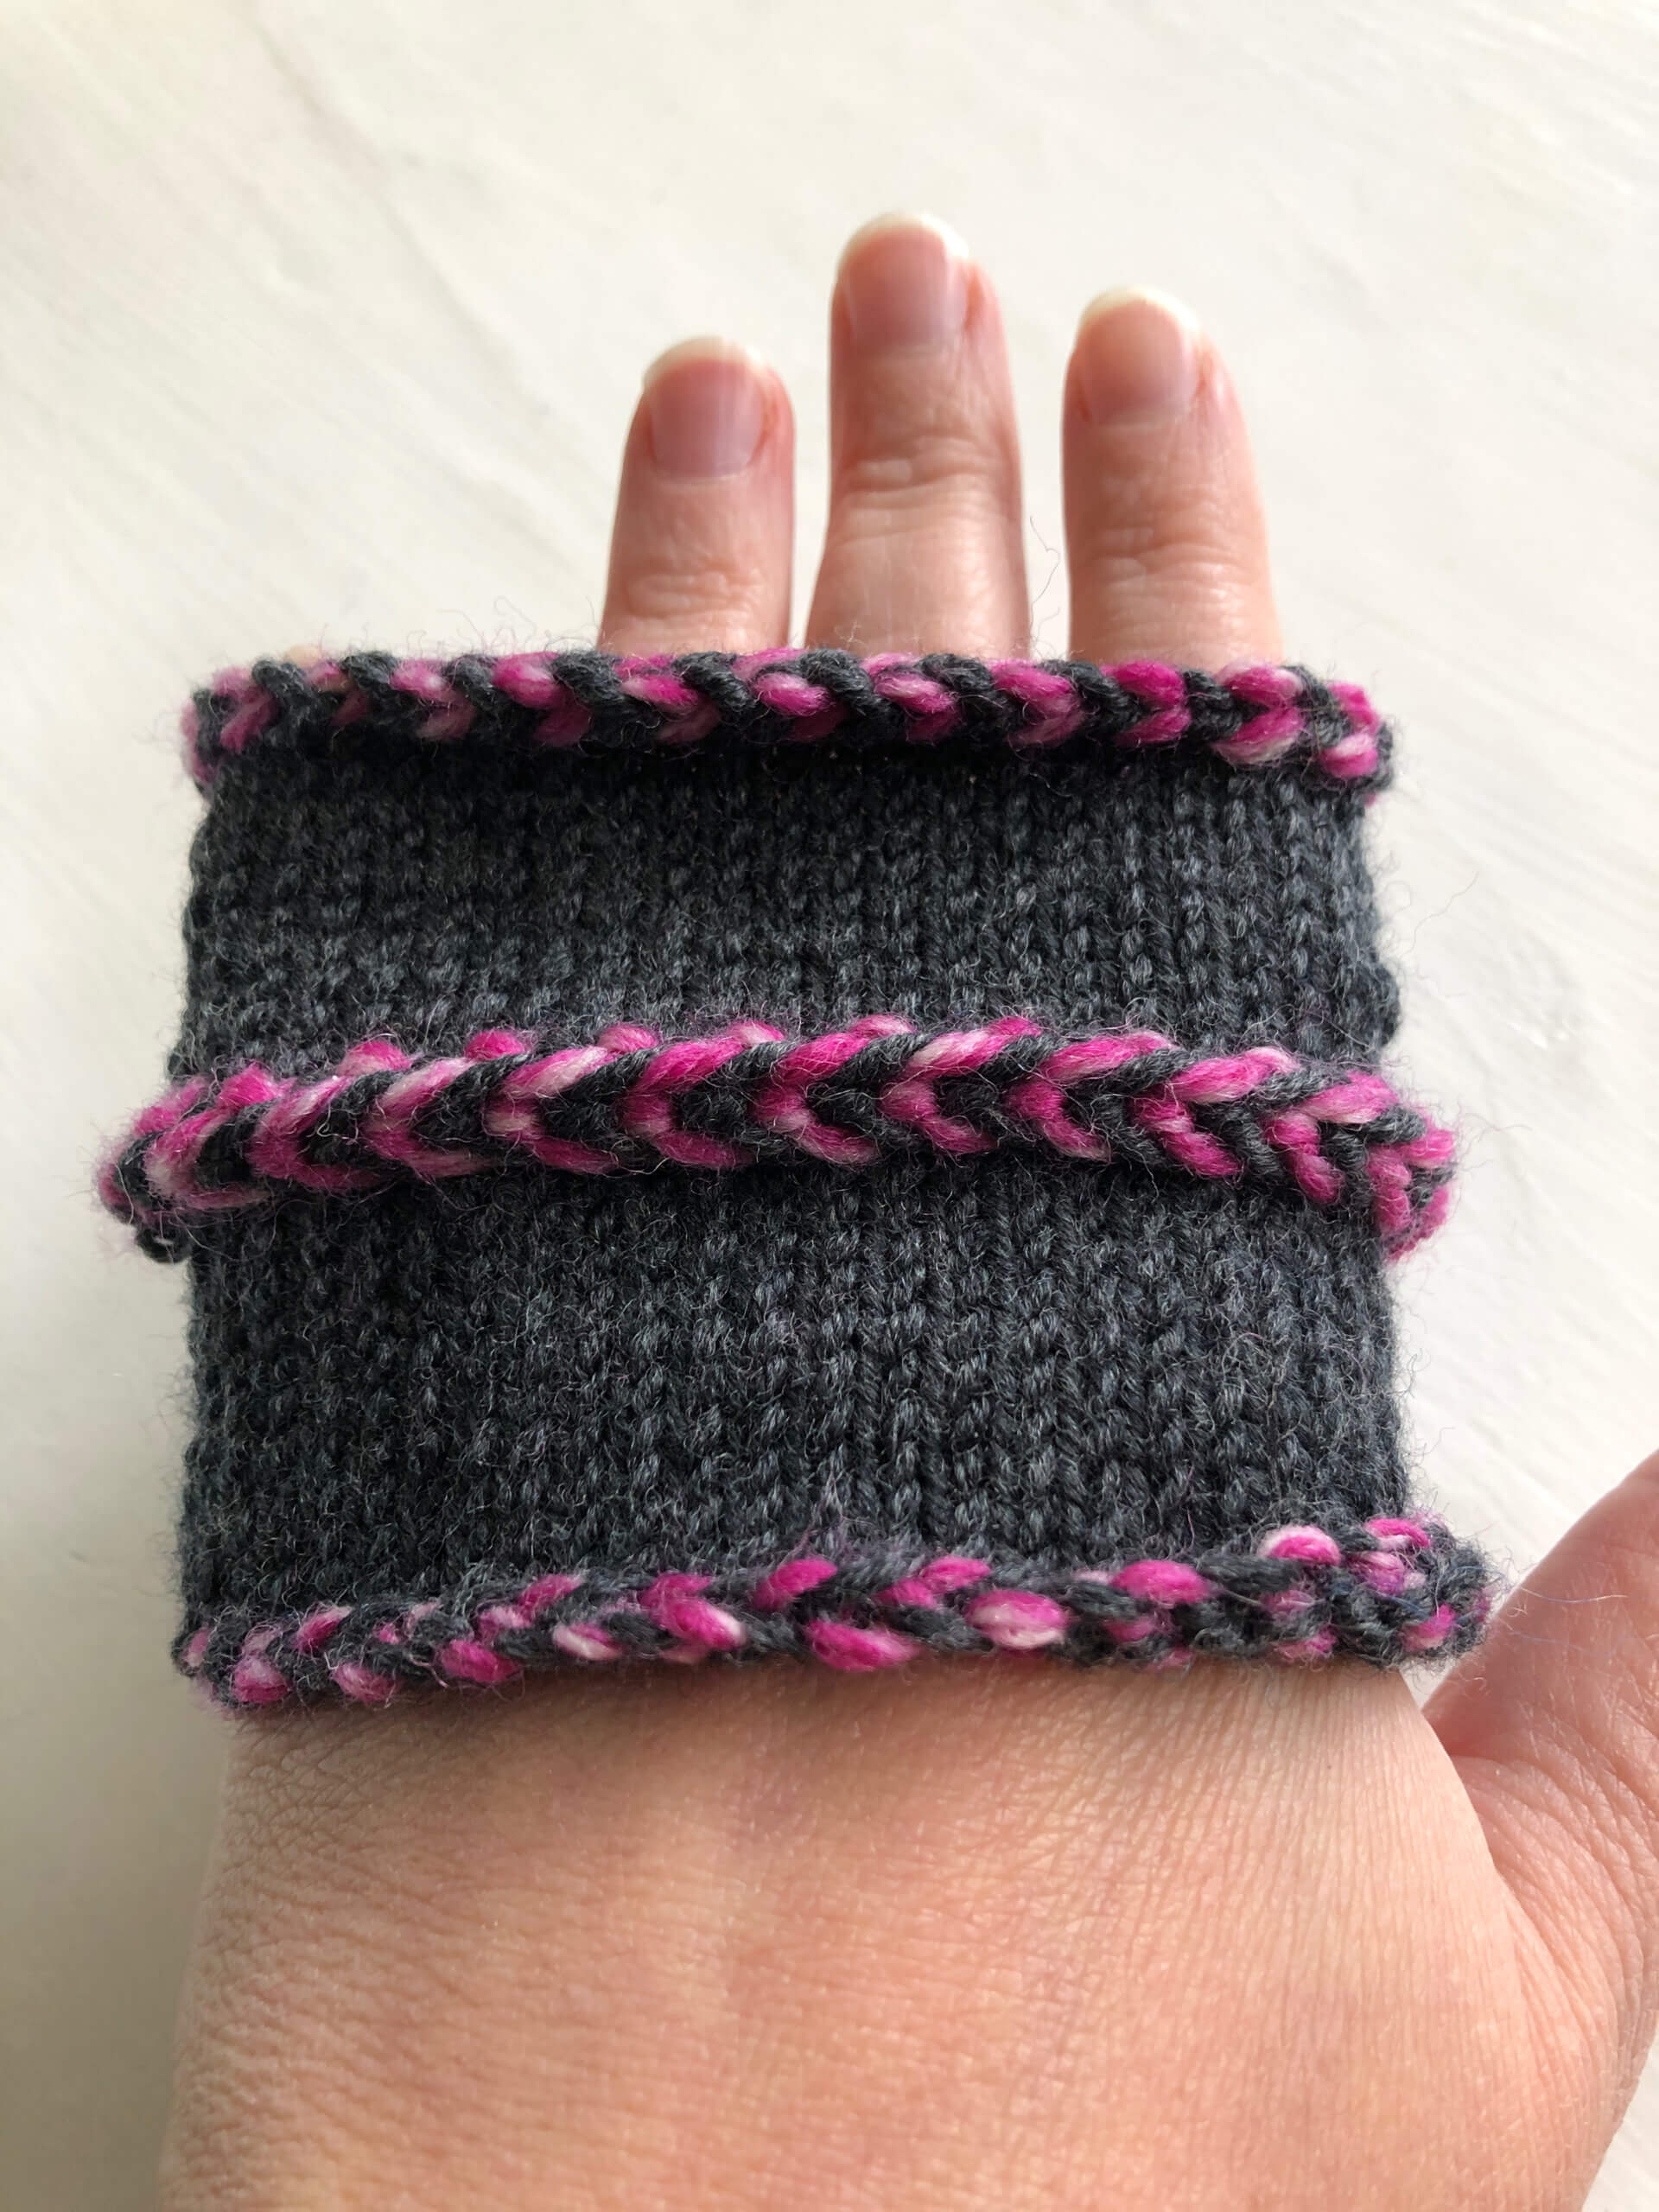 A sample knit in the round showing (from the top down) the Latvian braid bind off, the Latvian braid, and the Latvian cast on 